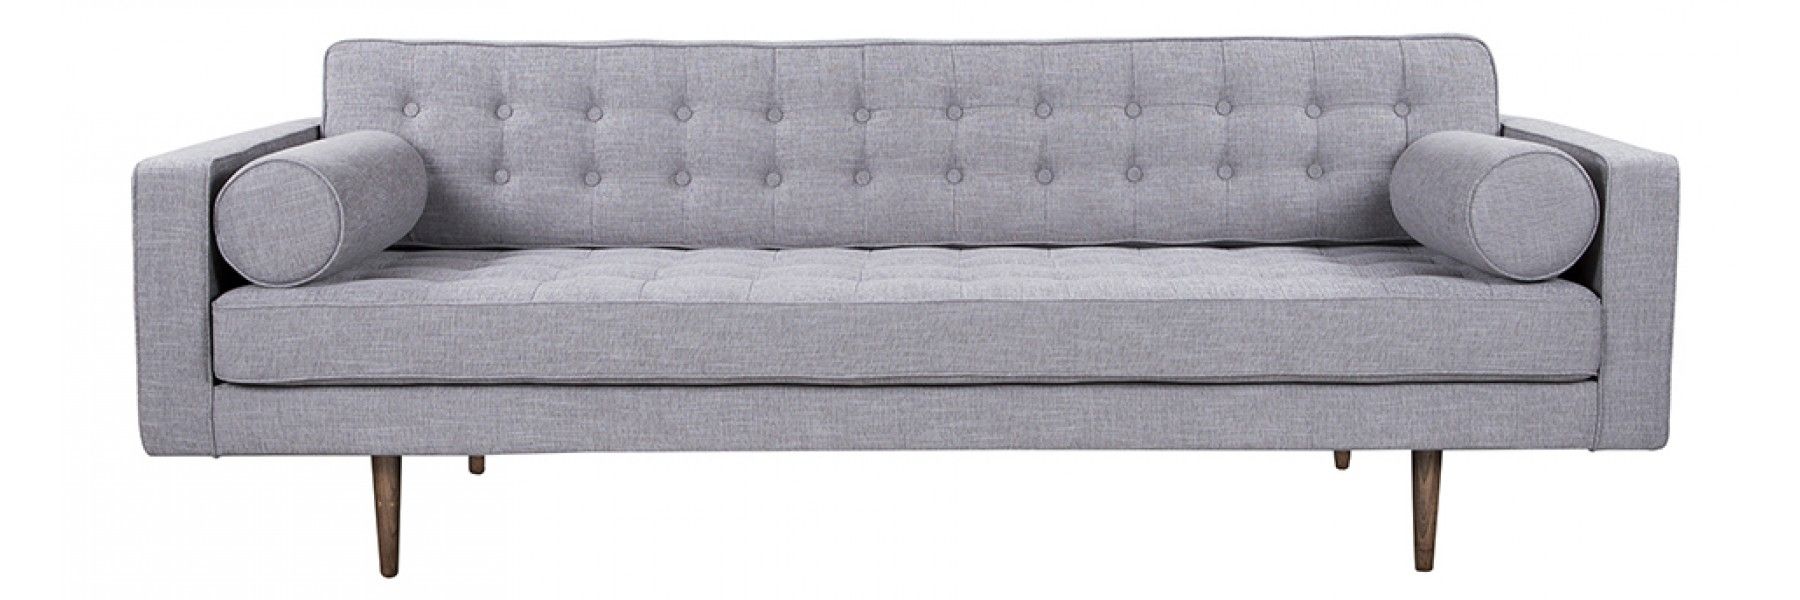 Capetown Sofa Grey Pertaining To Nico Grey Sectionals With Left Facing Storage Chaise (View 14 of 30)